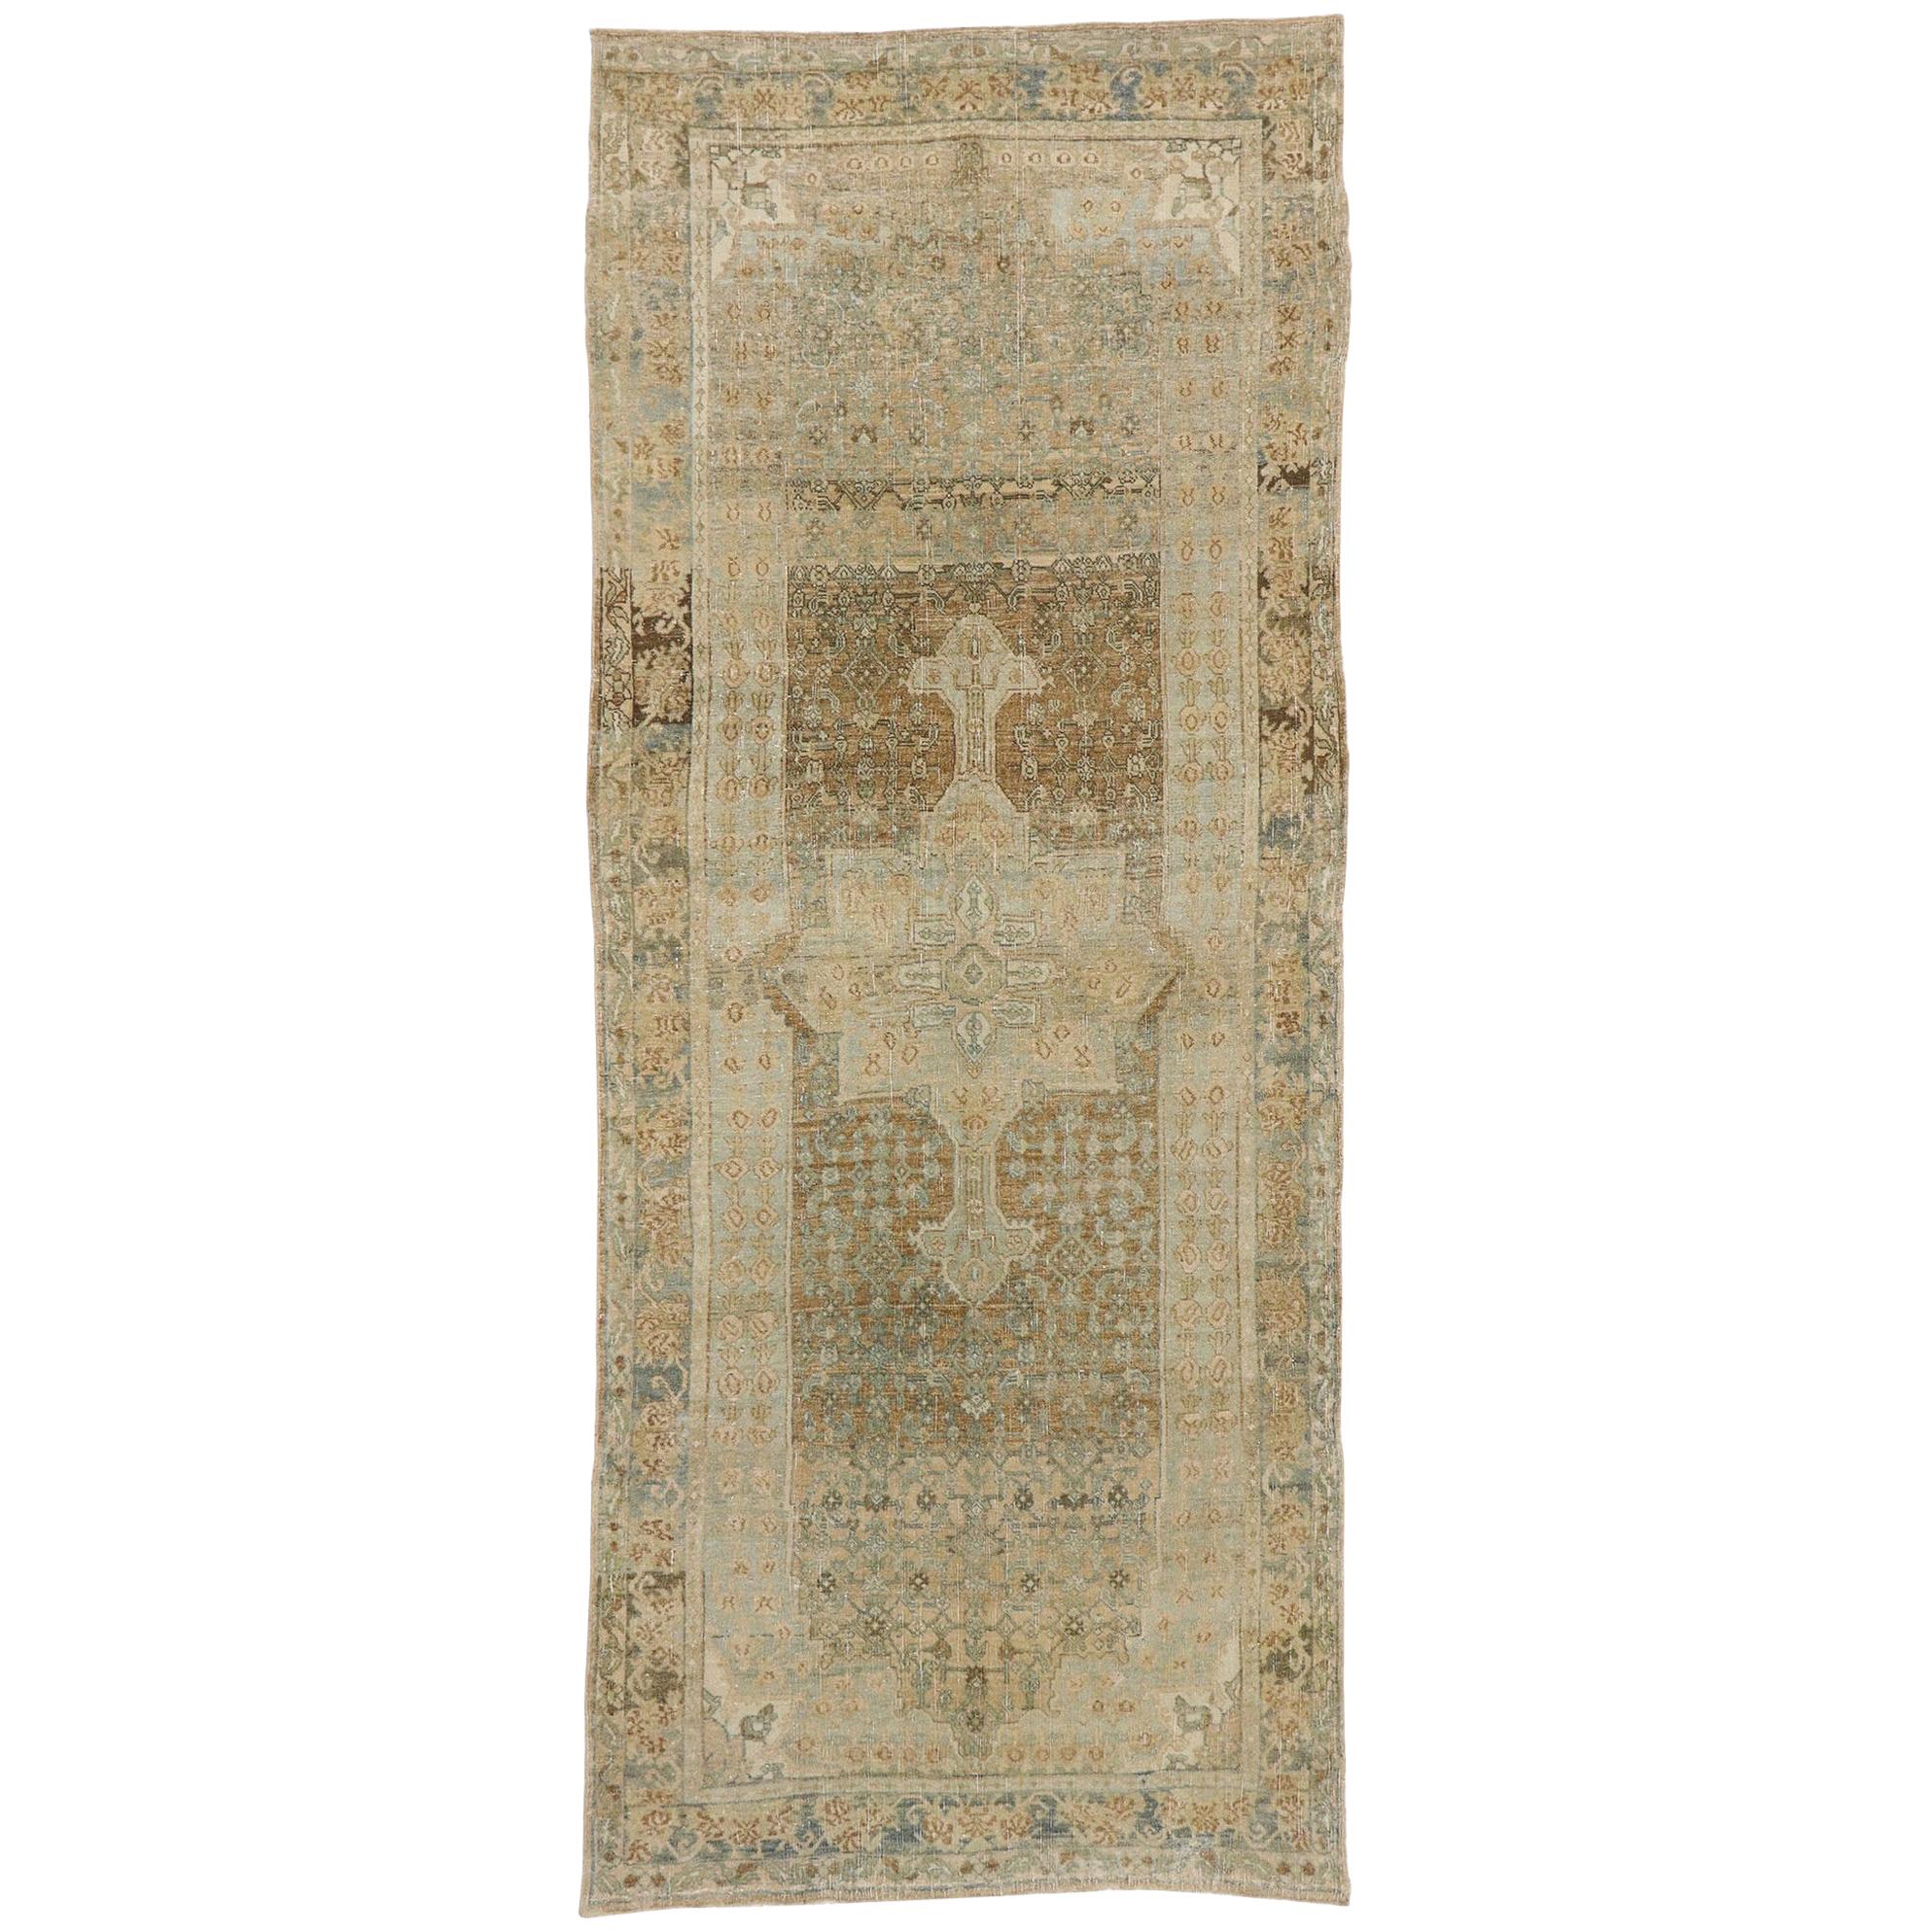 Distressed Antique Persian Bijar Runner with Modern Rustic Shaker Style For Sale